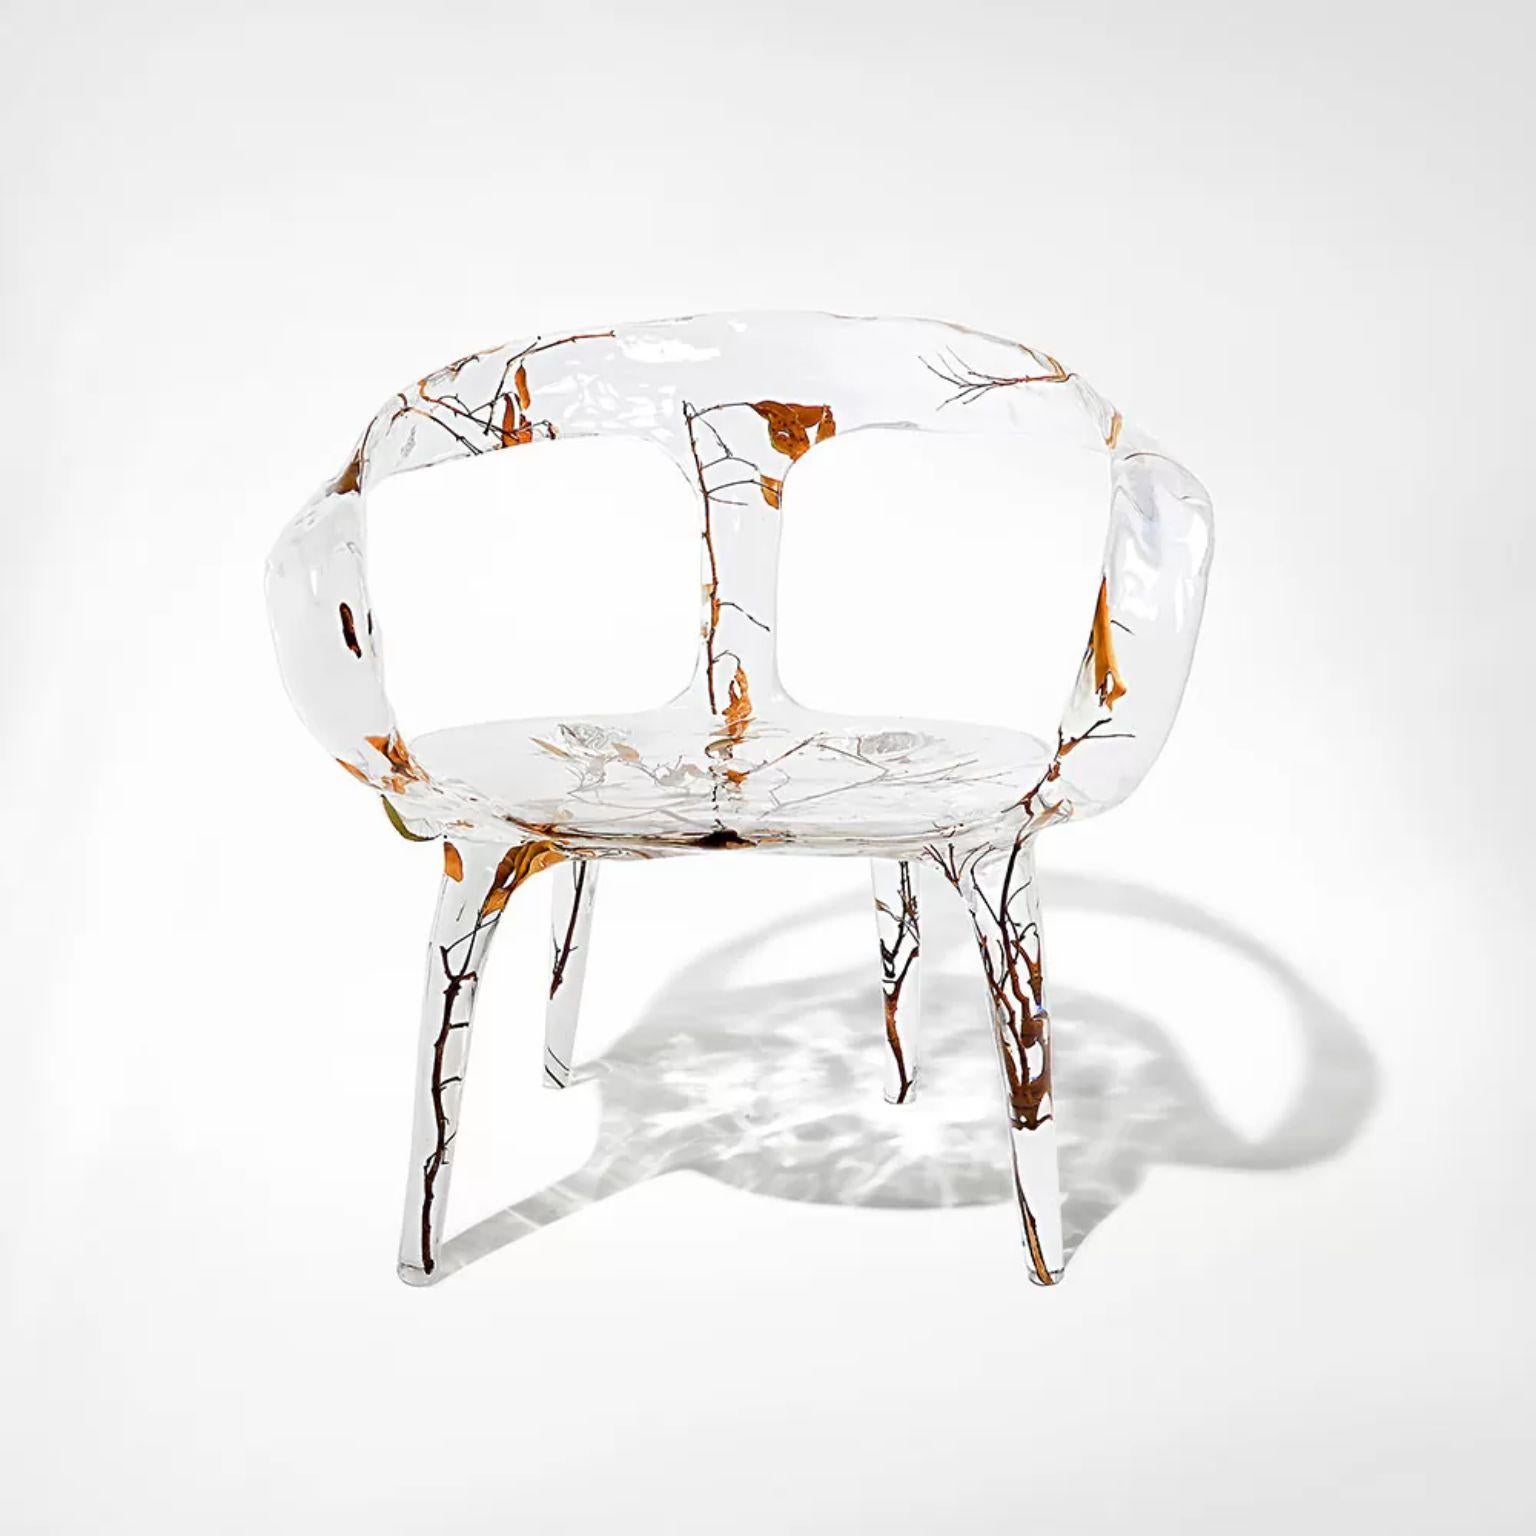 Branched Crystal Arm Chair by Dainte
Dimensions: D 66 x W 56 x H 79 cm.
Materials: Crystal. 

This decorative luxury armchair is dripping with style and sophistication. Made of sleek and lustrous crystal mixed with acrylic that has been enhanced